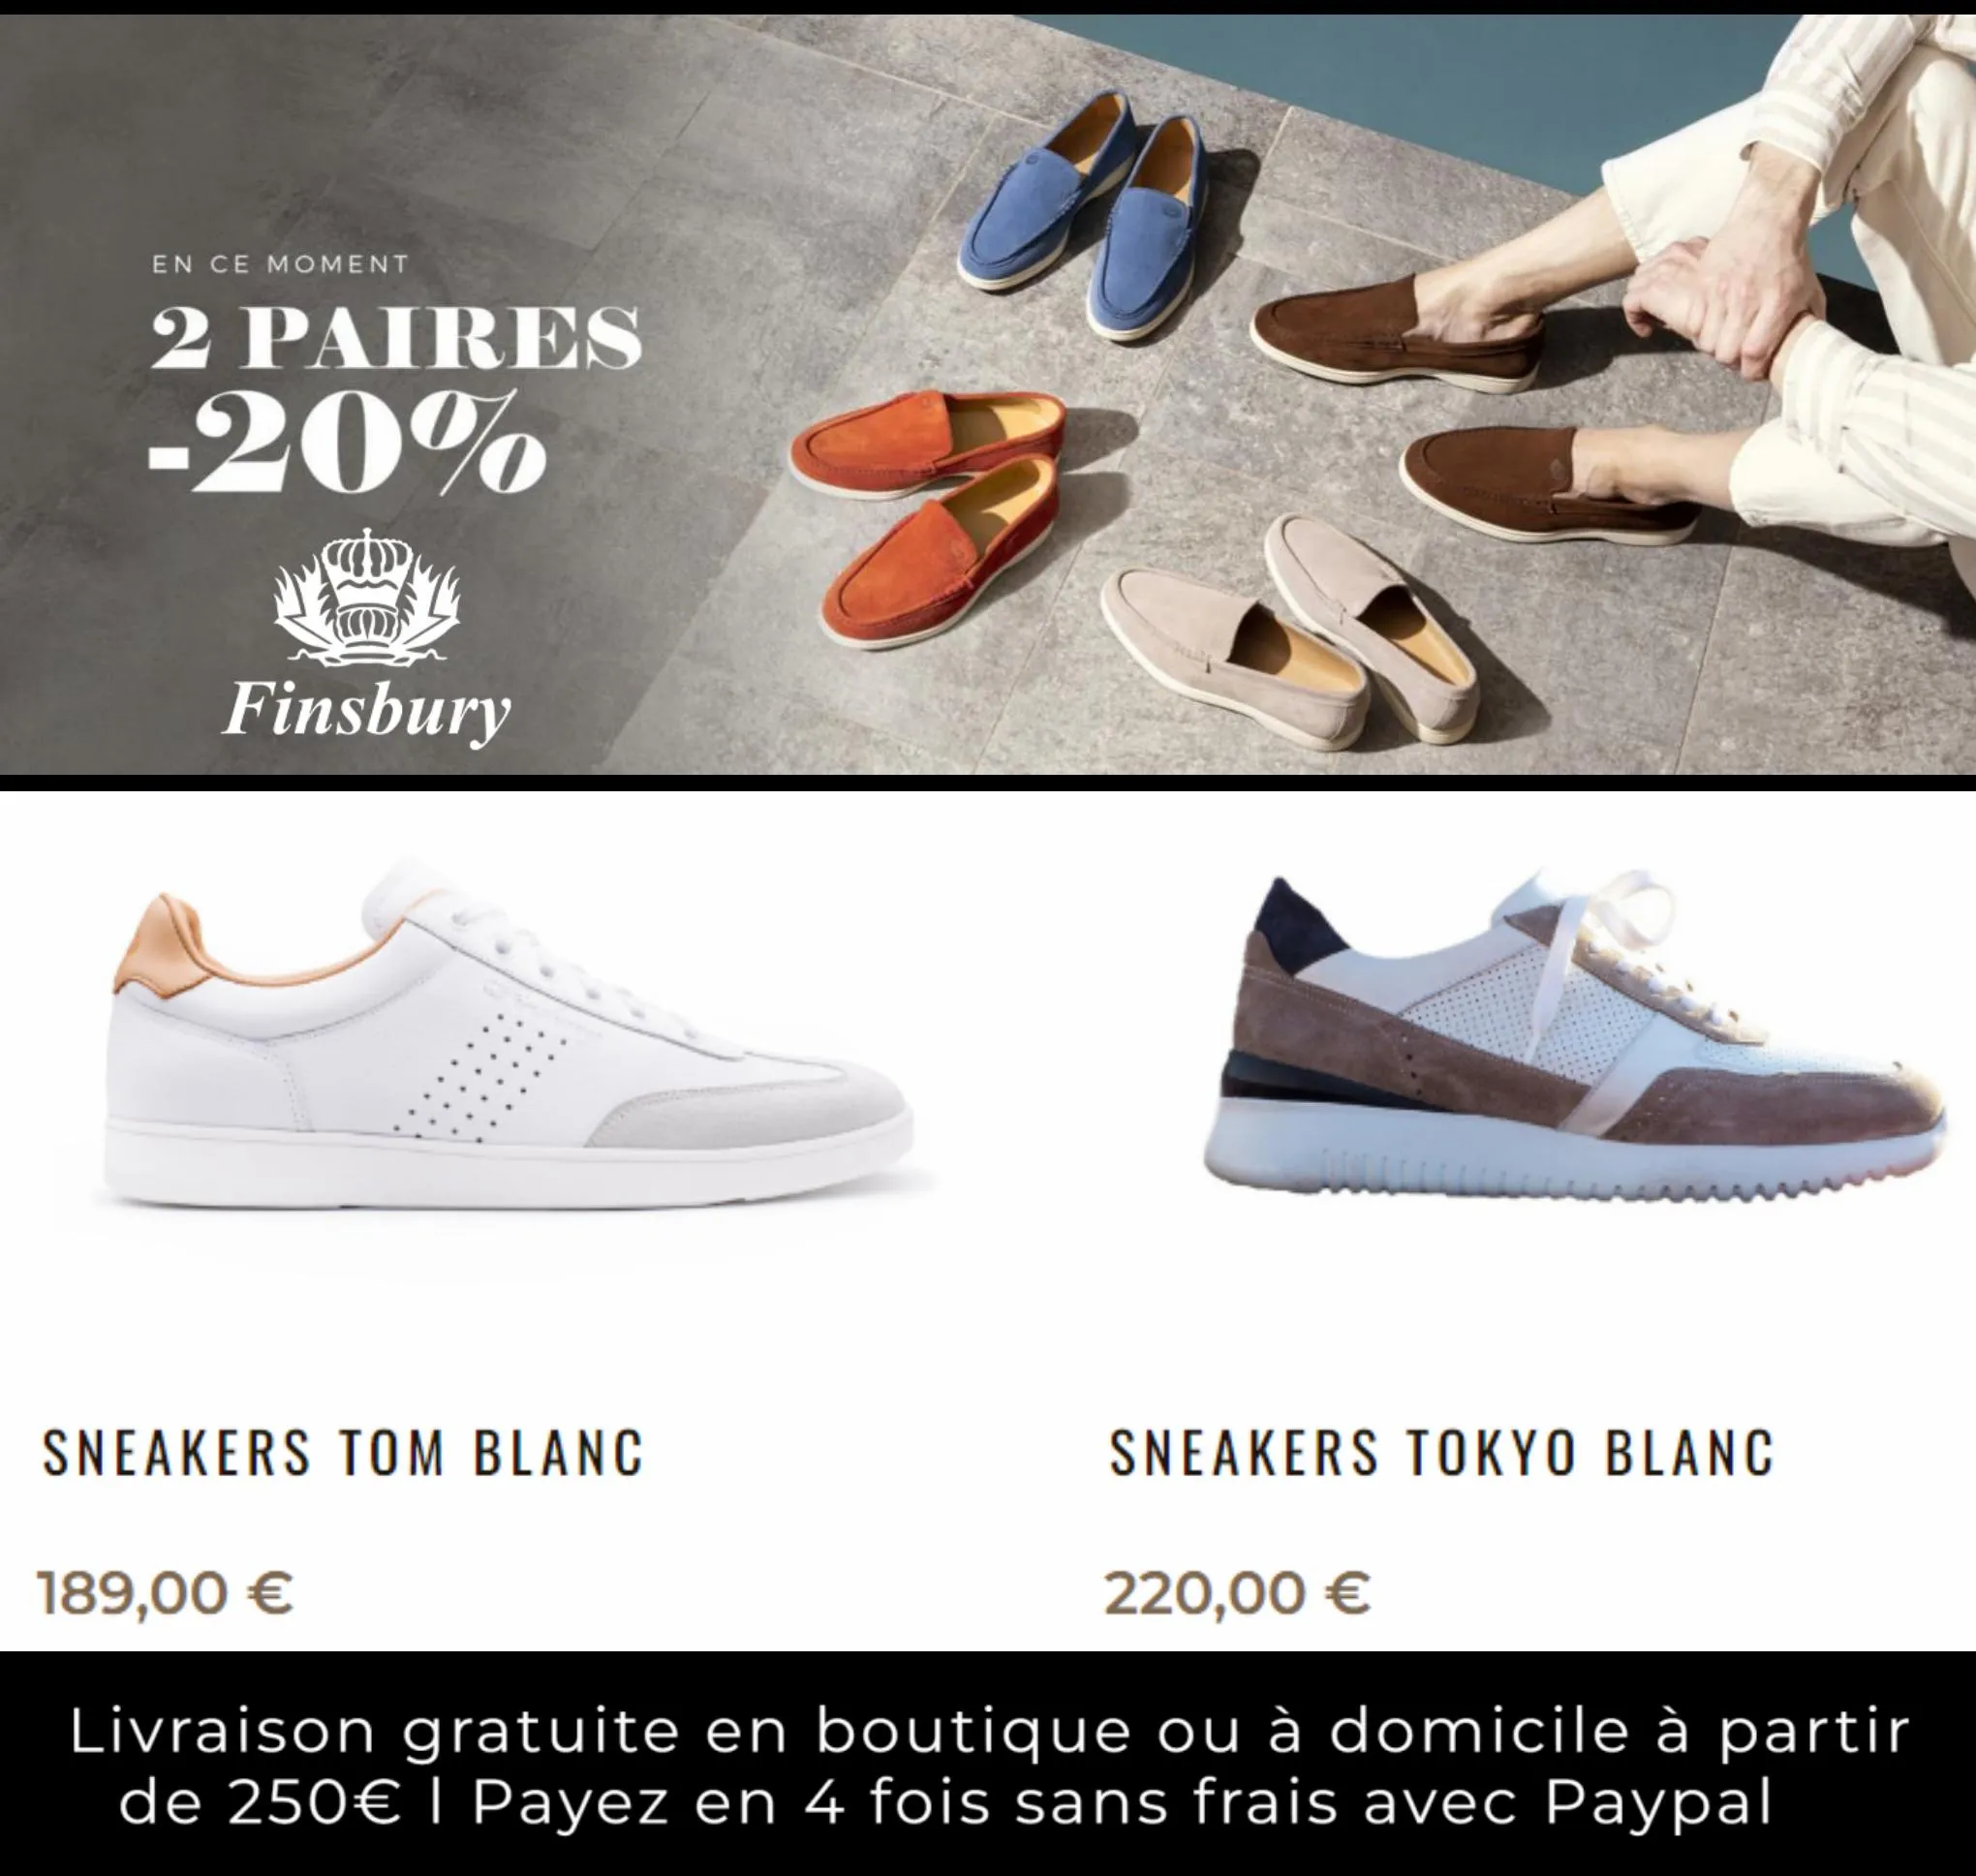 Catalogue 2 Paires -20%, page 00004